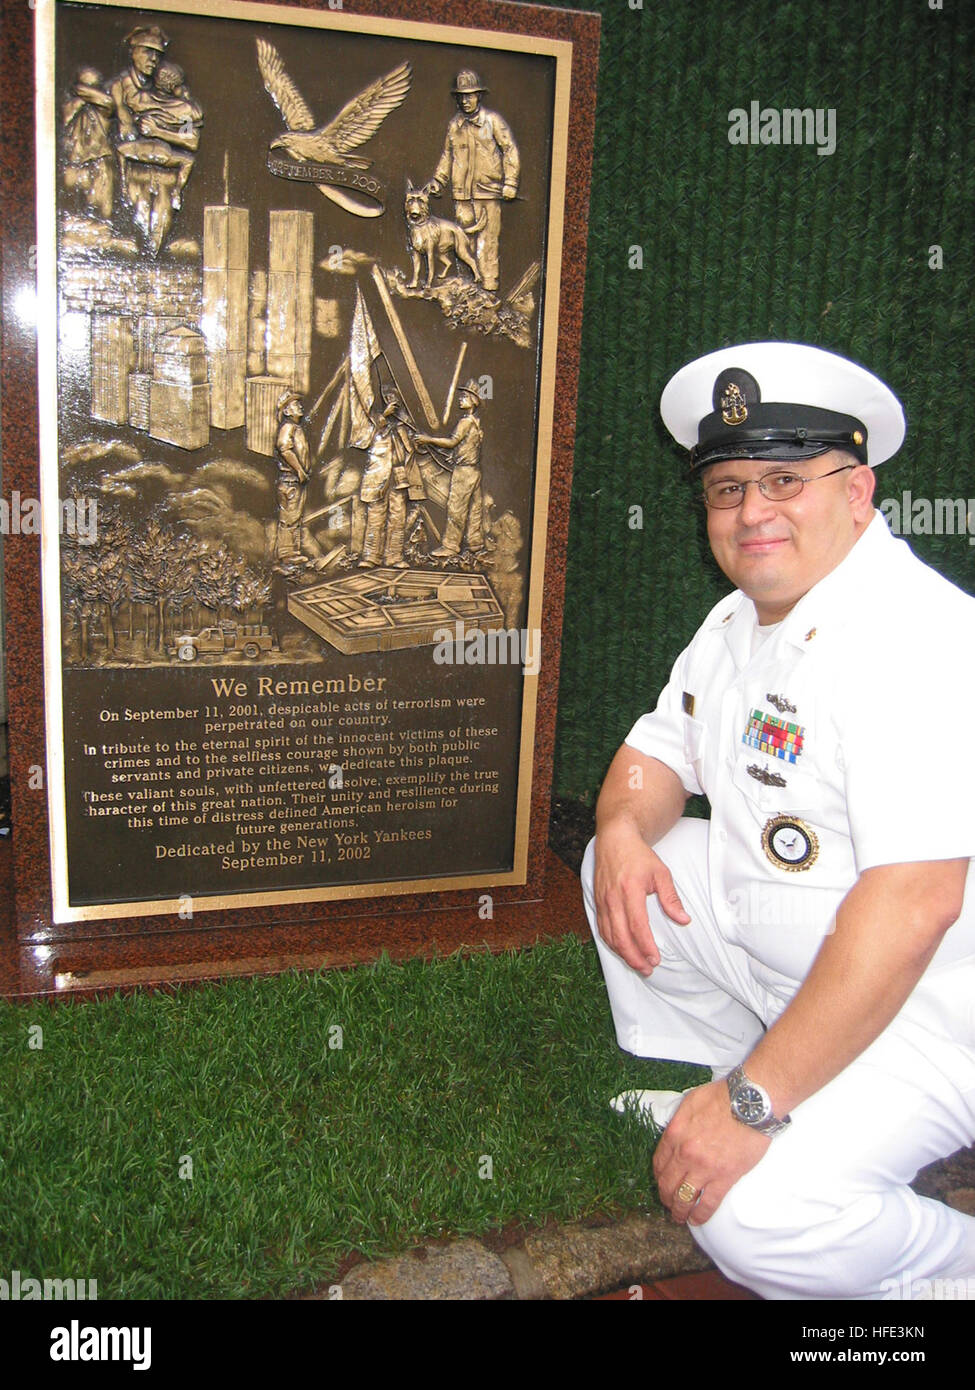 030523-N-5637H-001 New York, N.Y. (May 23, 2003) -- Chief Dave Maldonado poses next to the New York Yankees 9/11 Memorial after re-enlisting in the Yankee Stadium Monument Park.  U.S. Navy photo by Journalist 1st Class John Harrington.  (RELEASED) US Navy 030523-N-5637H-001 Chief Dave Maldonado poses next to the New York Yankees 9-11 Memorial after re-enlisting in the Yankee Stadium Monument Park Stock Photo